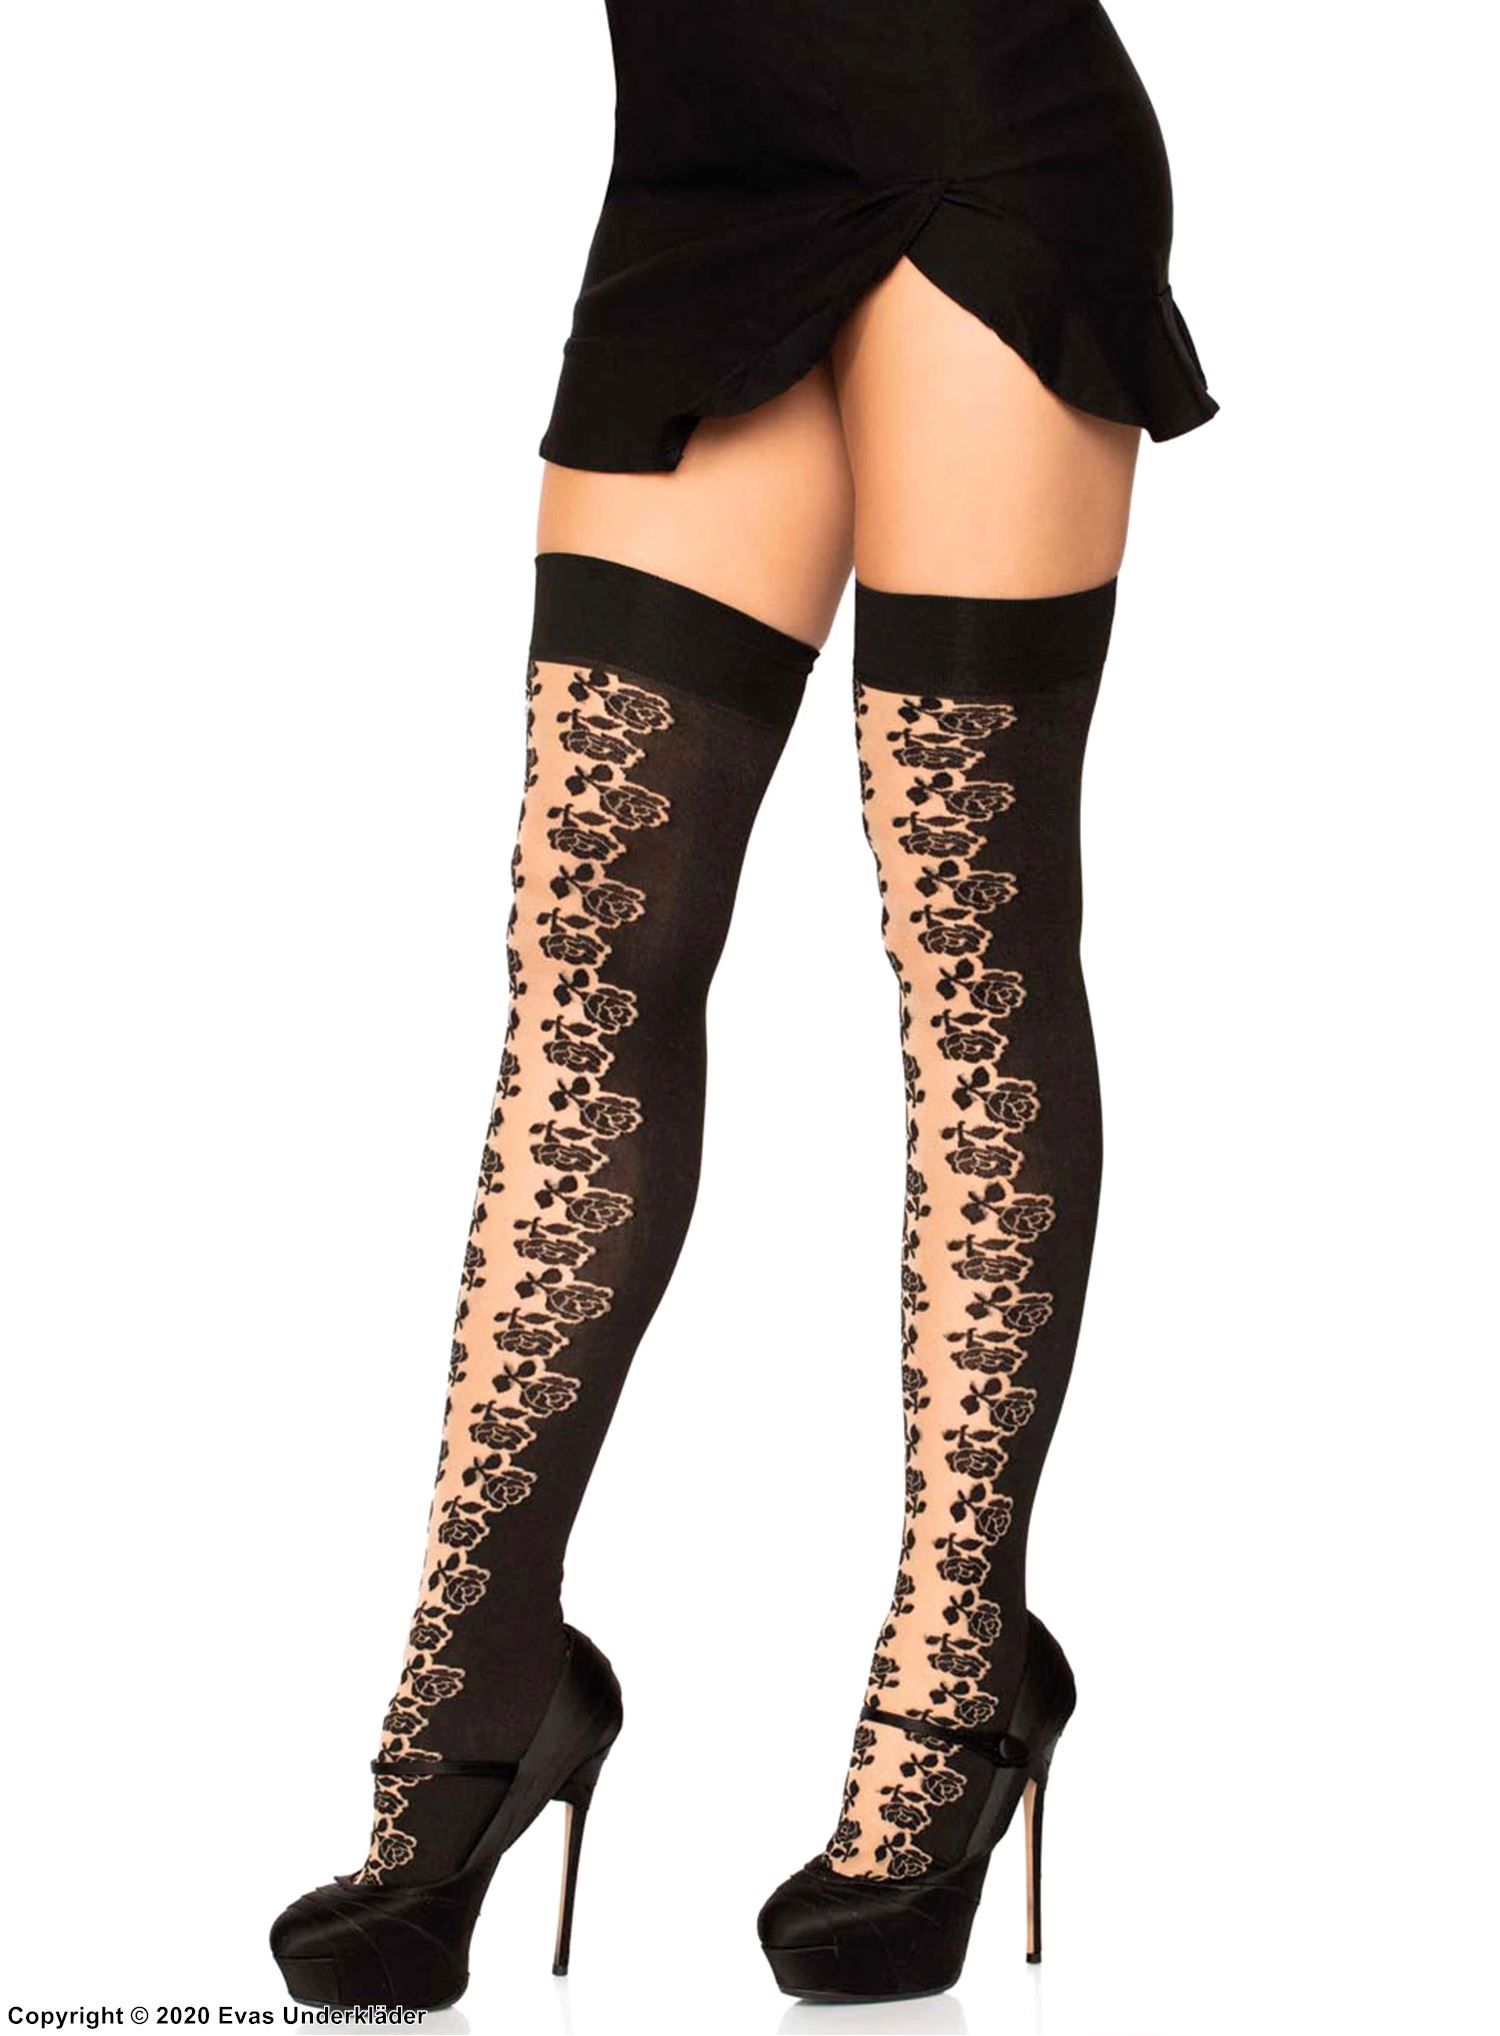 Thigh high stay-ups, opaque fabric, roses